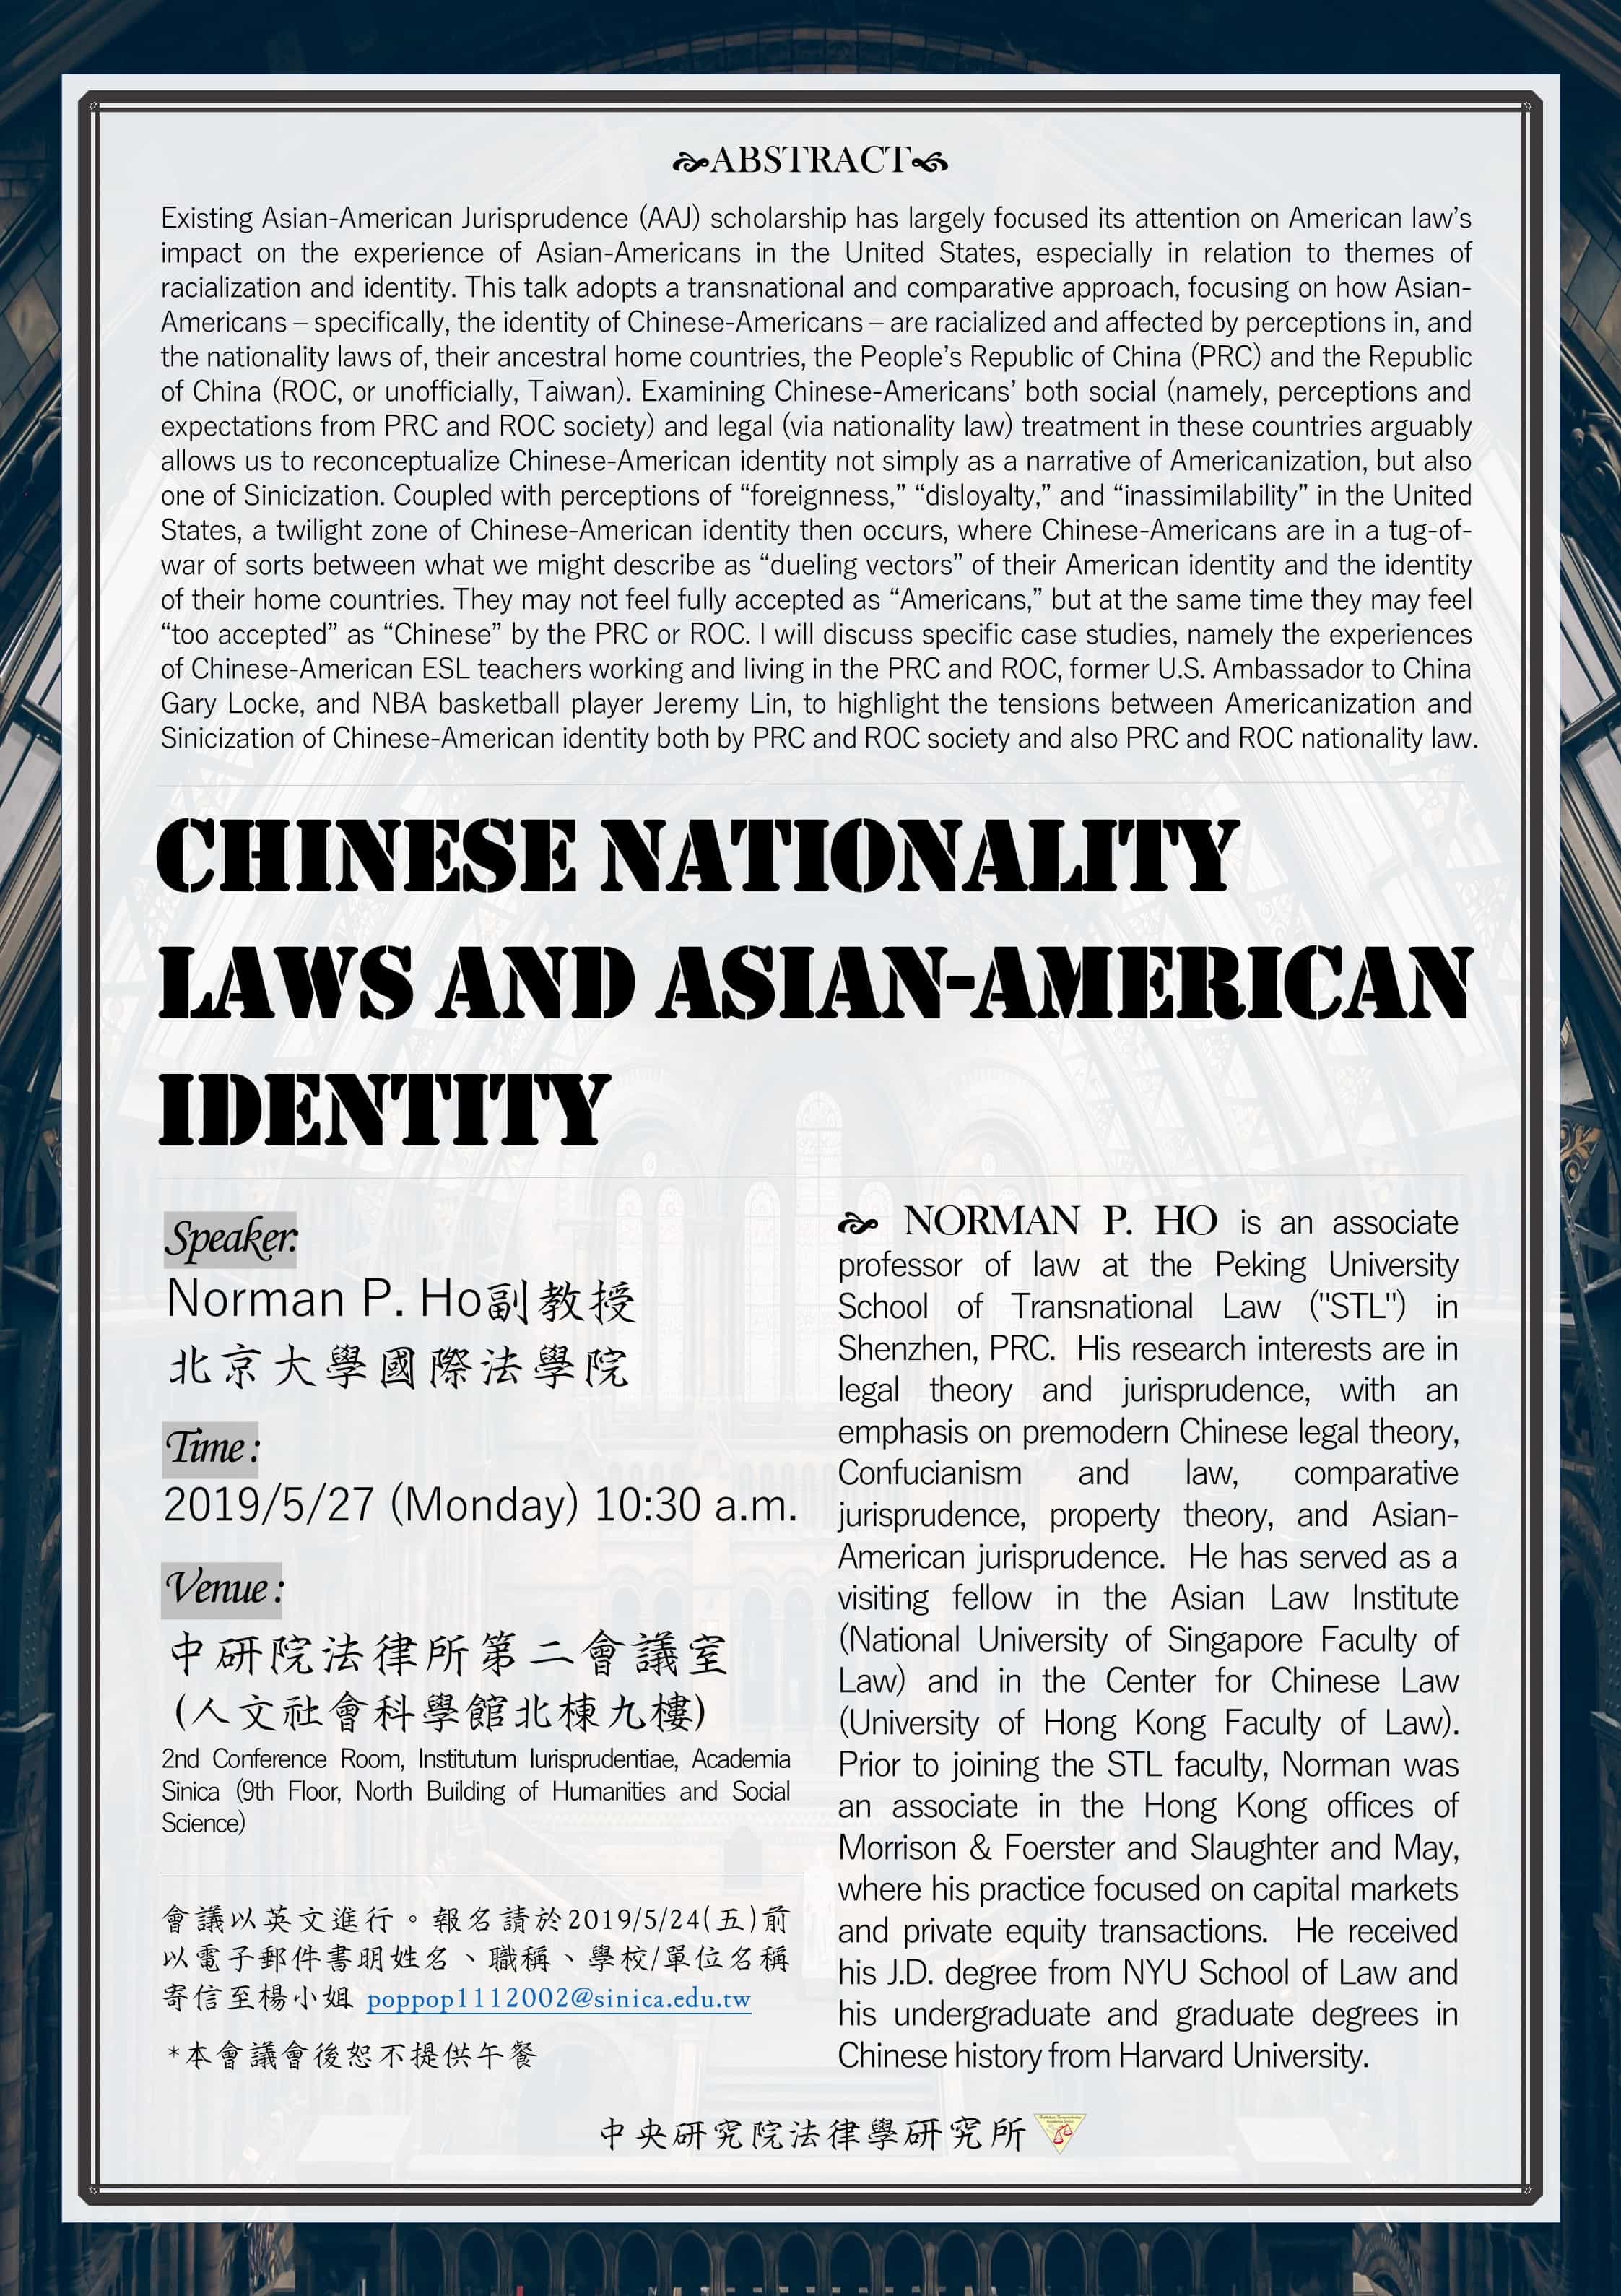 Seminar: Chinese Nationality Laws and Asian-American Identity